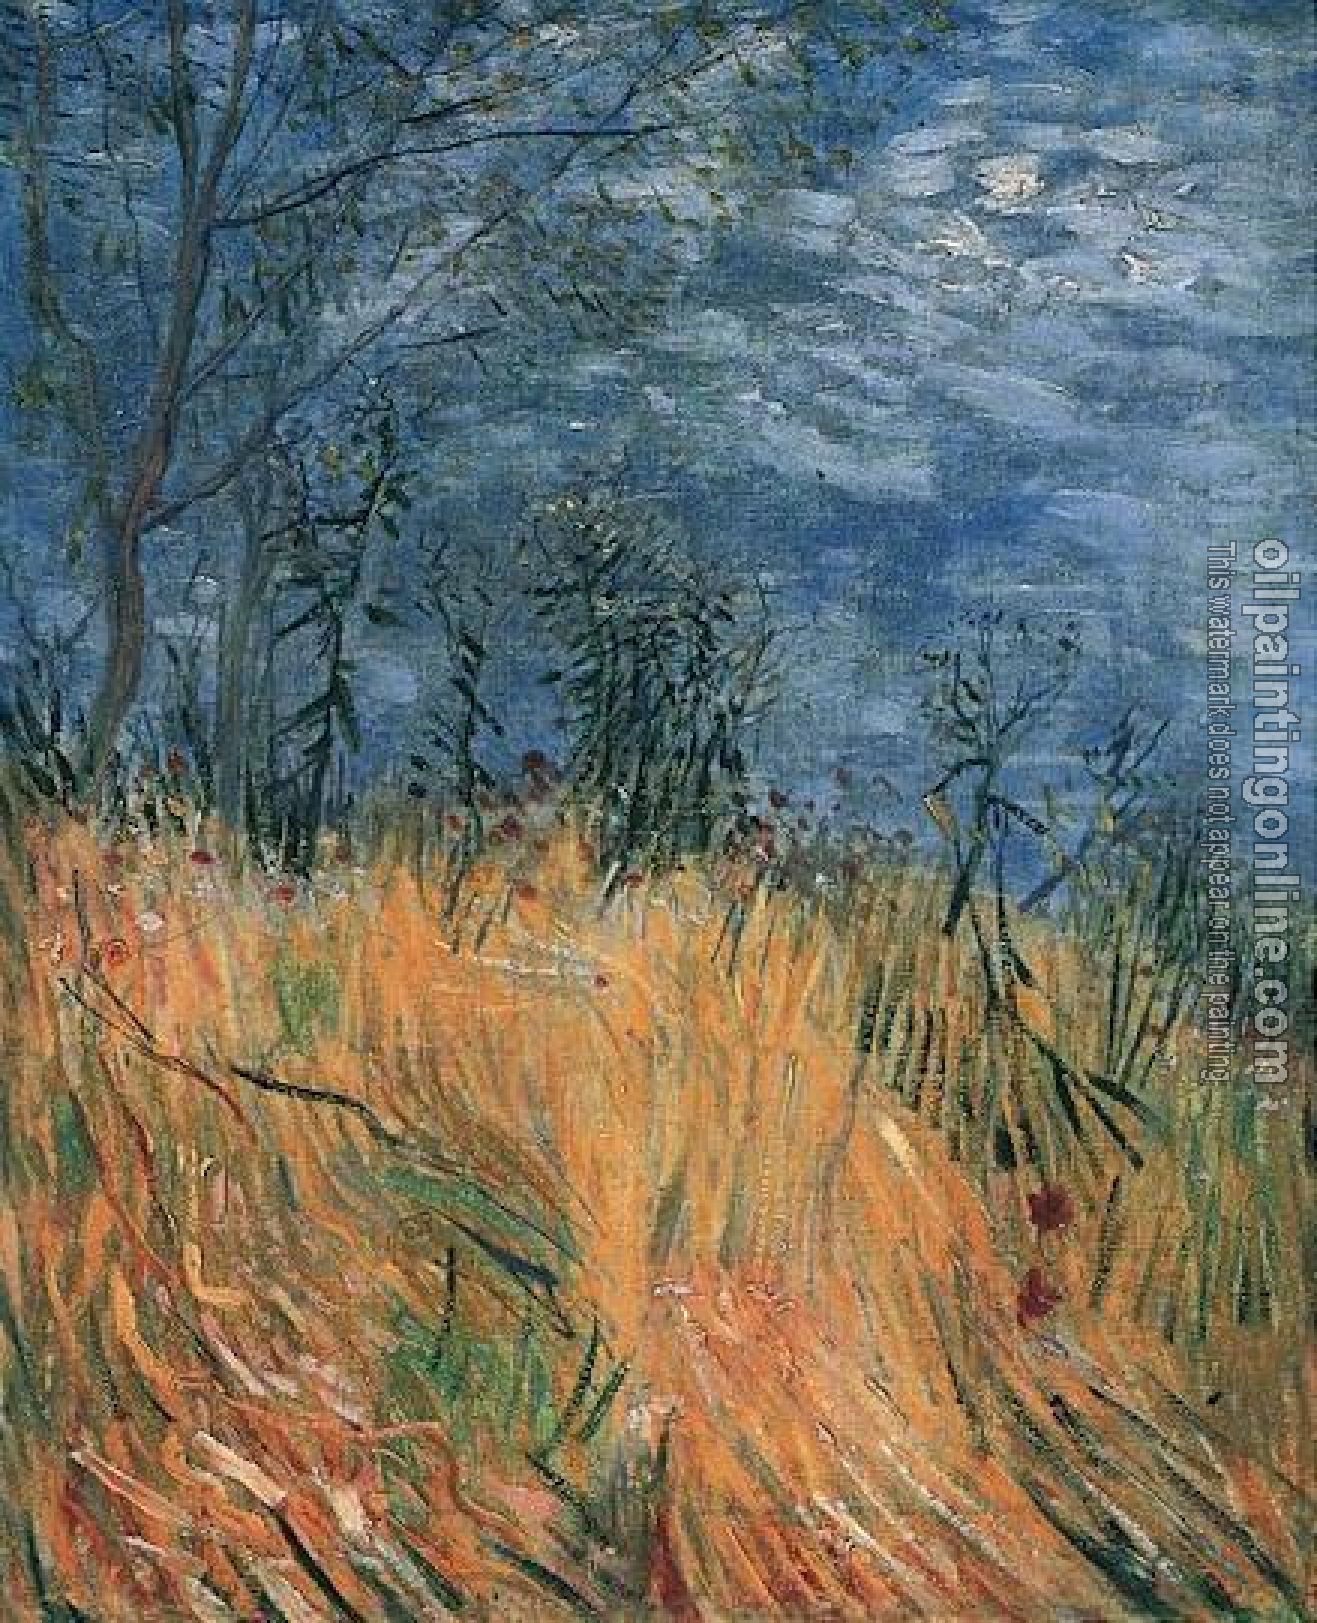 Gogh, Vincent van - Edge of a Wheatfield with Poppies